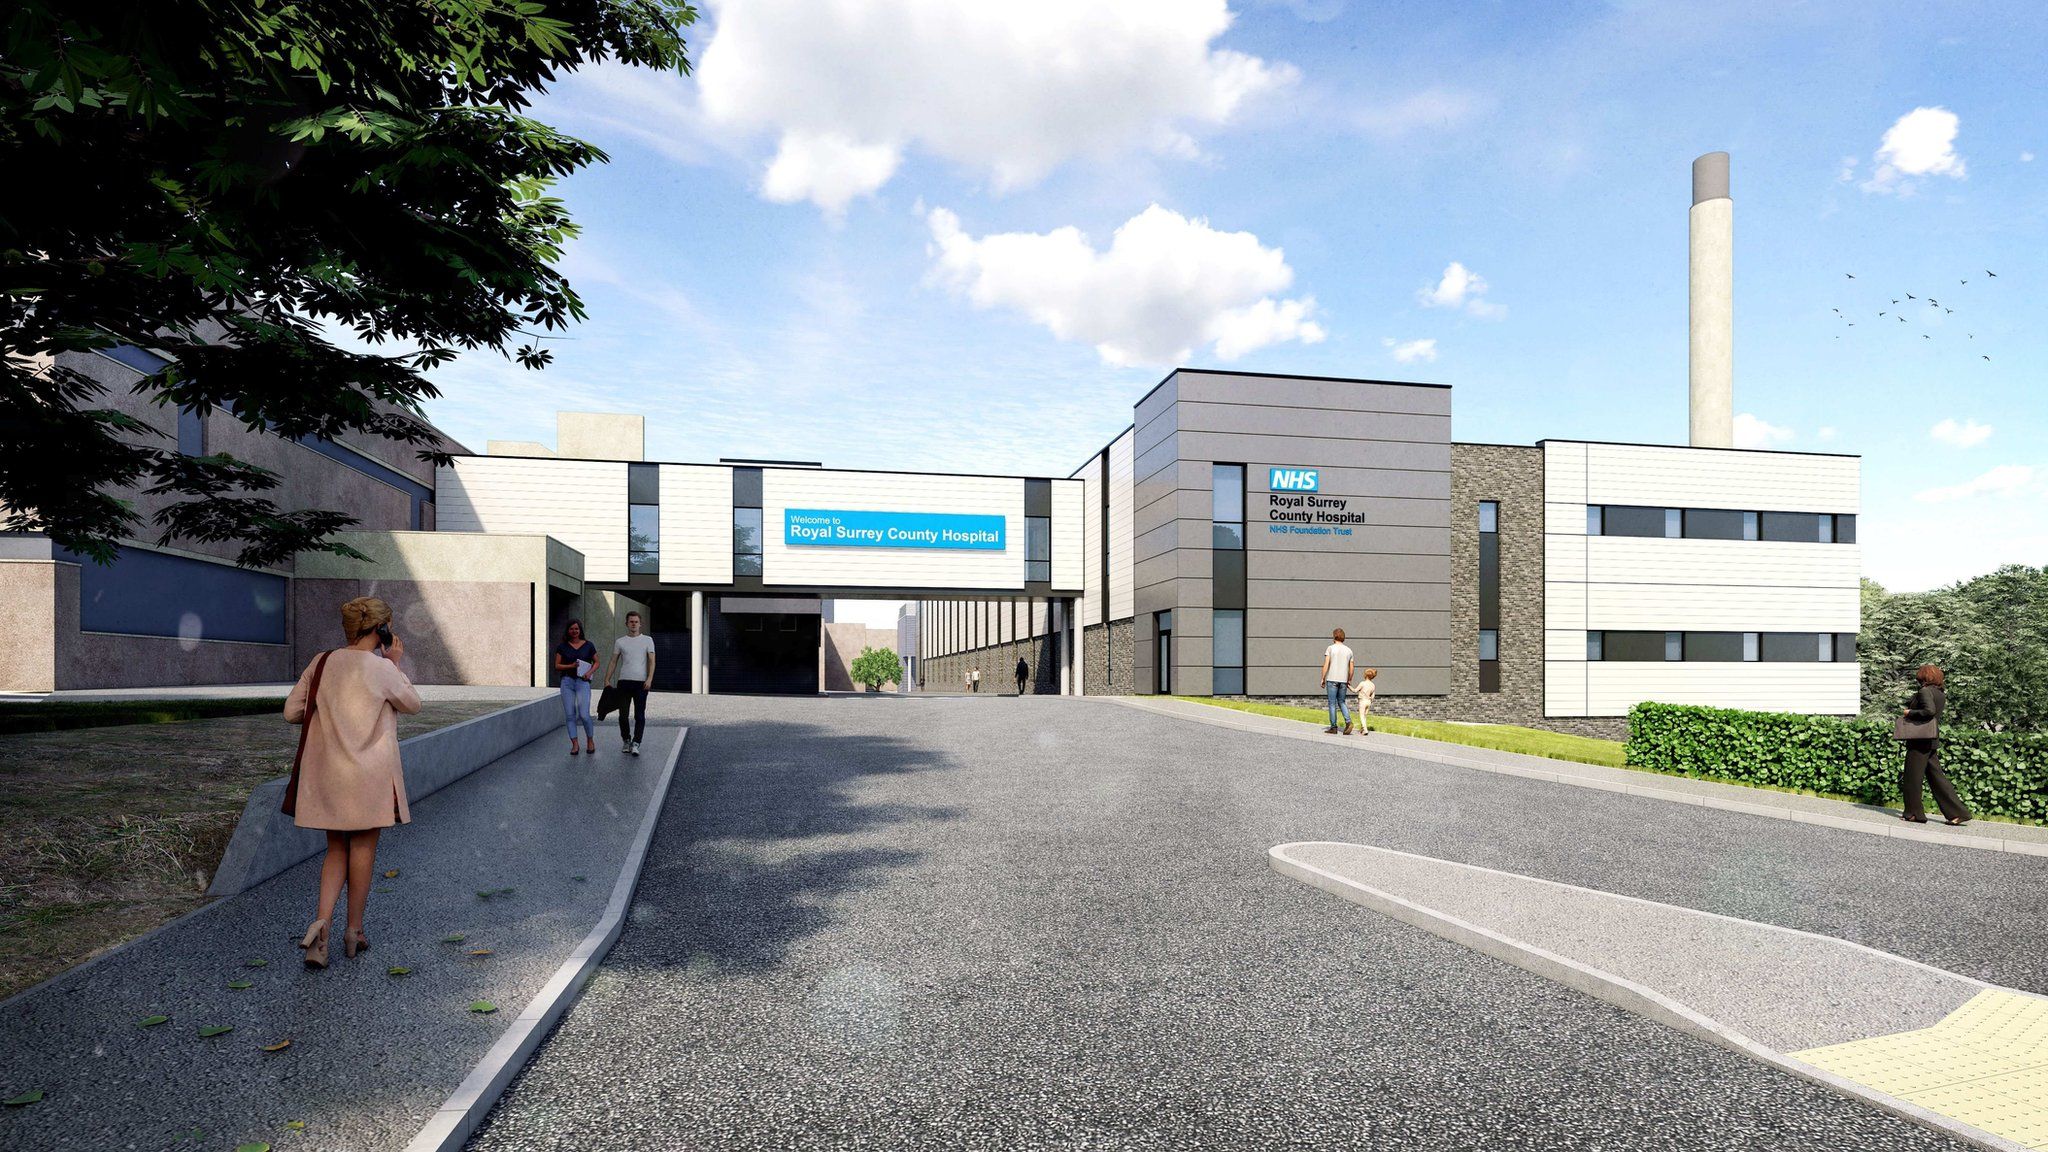 An artist's impression of a new hospital building